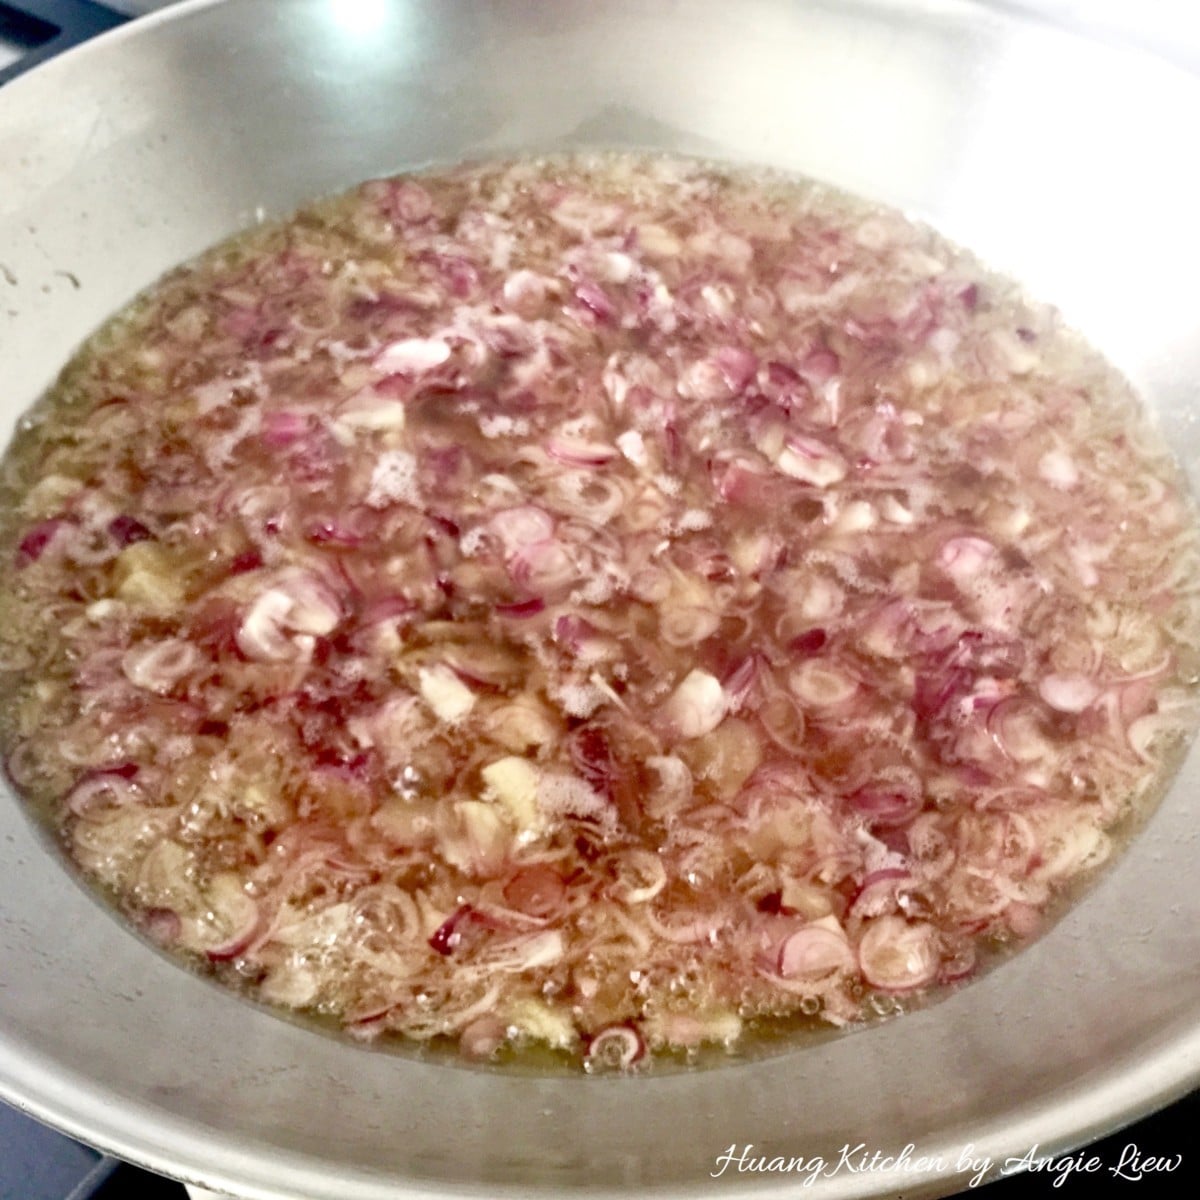 Fry the shallots.